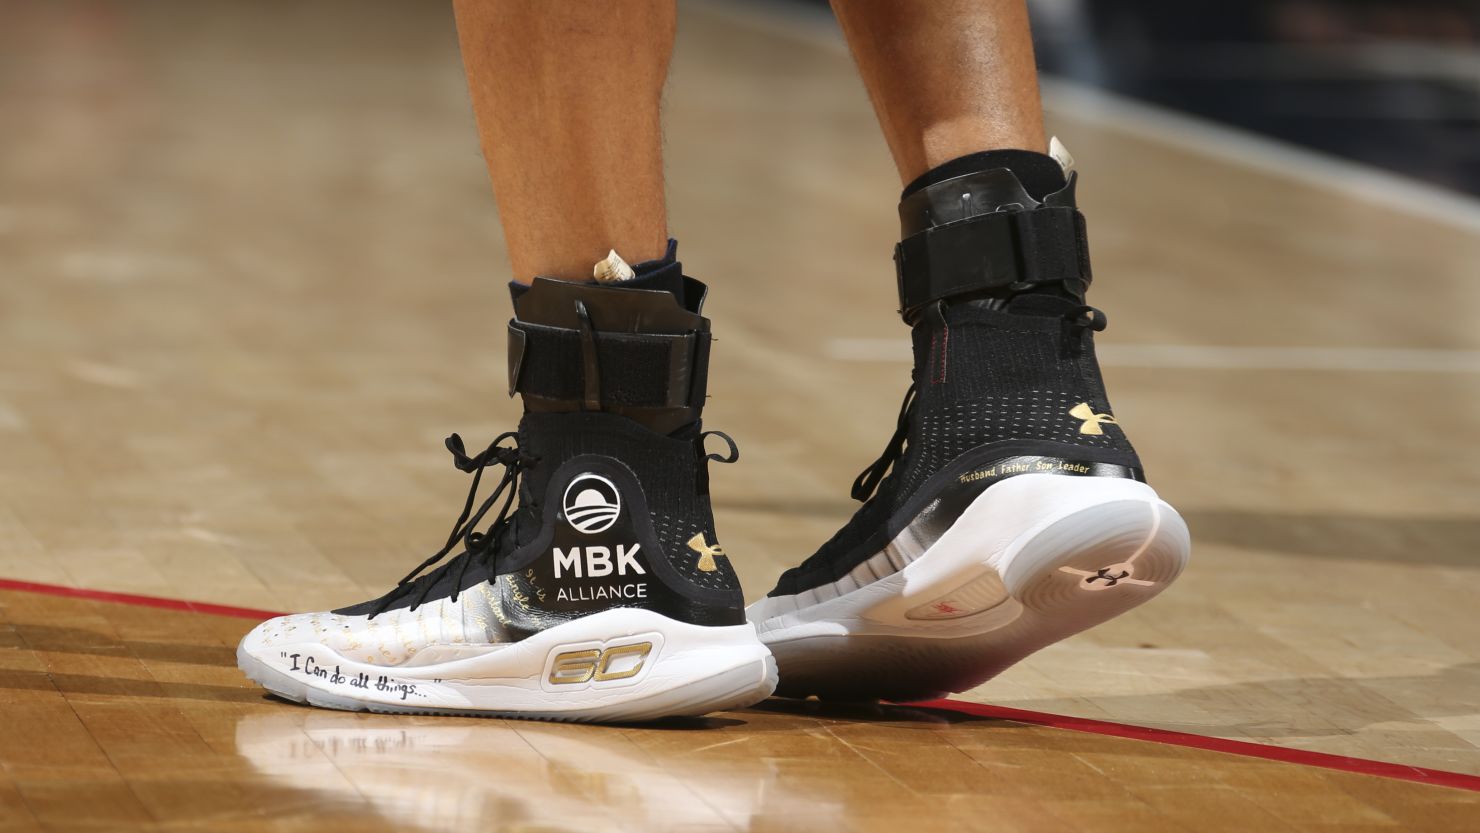 WASHINGTON, DC - FEBRUARY 28: Sneakers of Stephen Curry #30 of the Golden State Warriors during game against the Washington Wizards on February 28, 2018 at Capital One Arena in Washington, DC. 